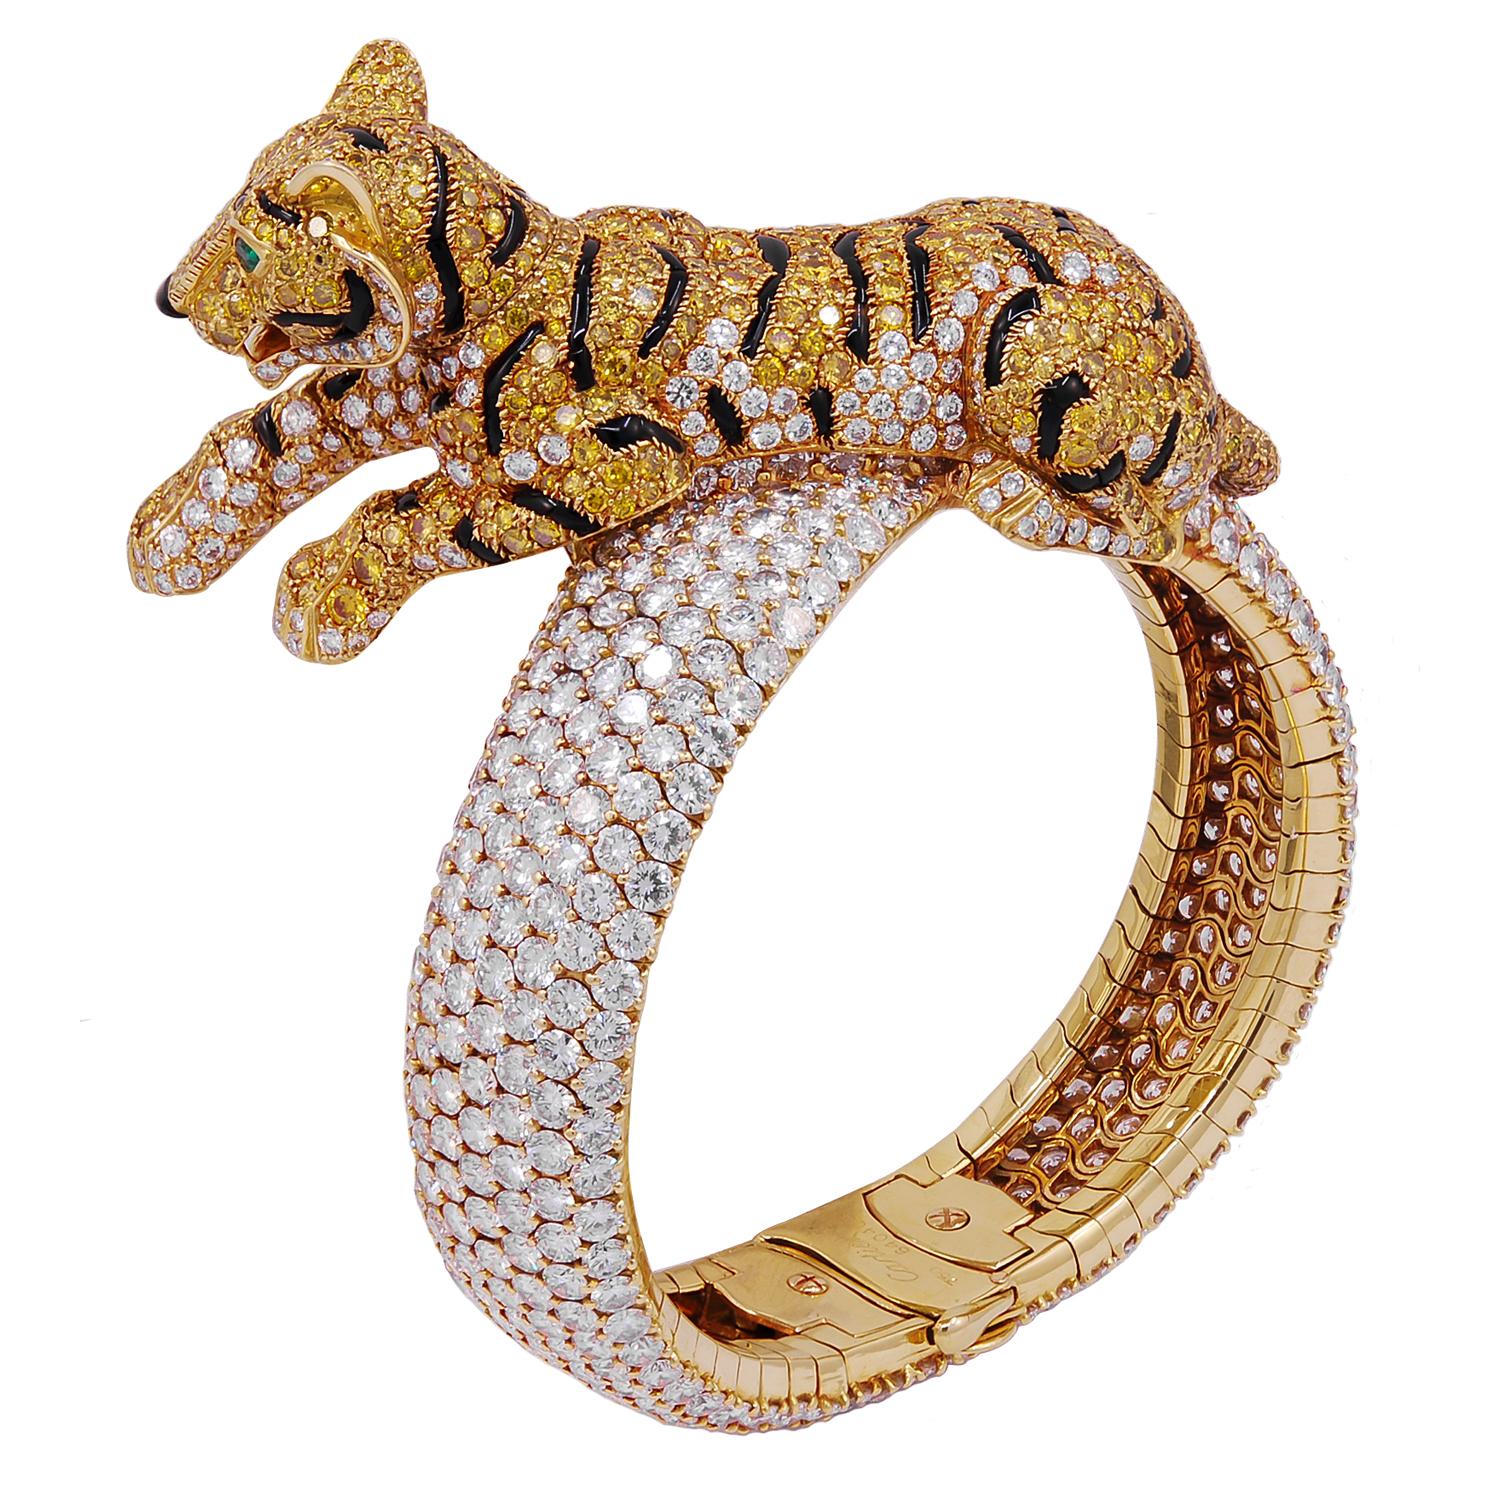 Mixed Cut Cartier Vivid Yellow, White Diamond Panther Watch For Sale